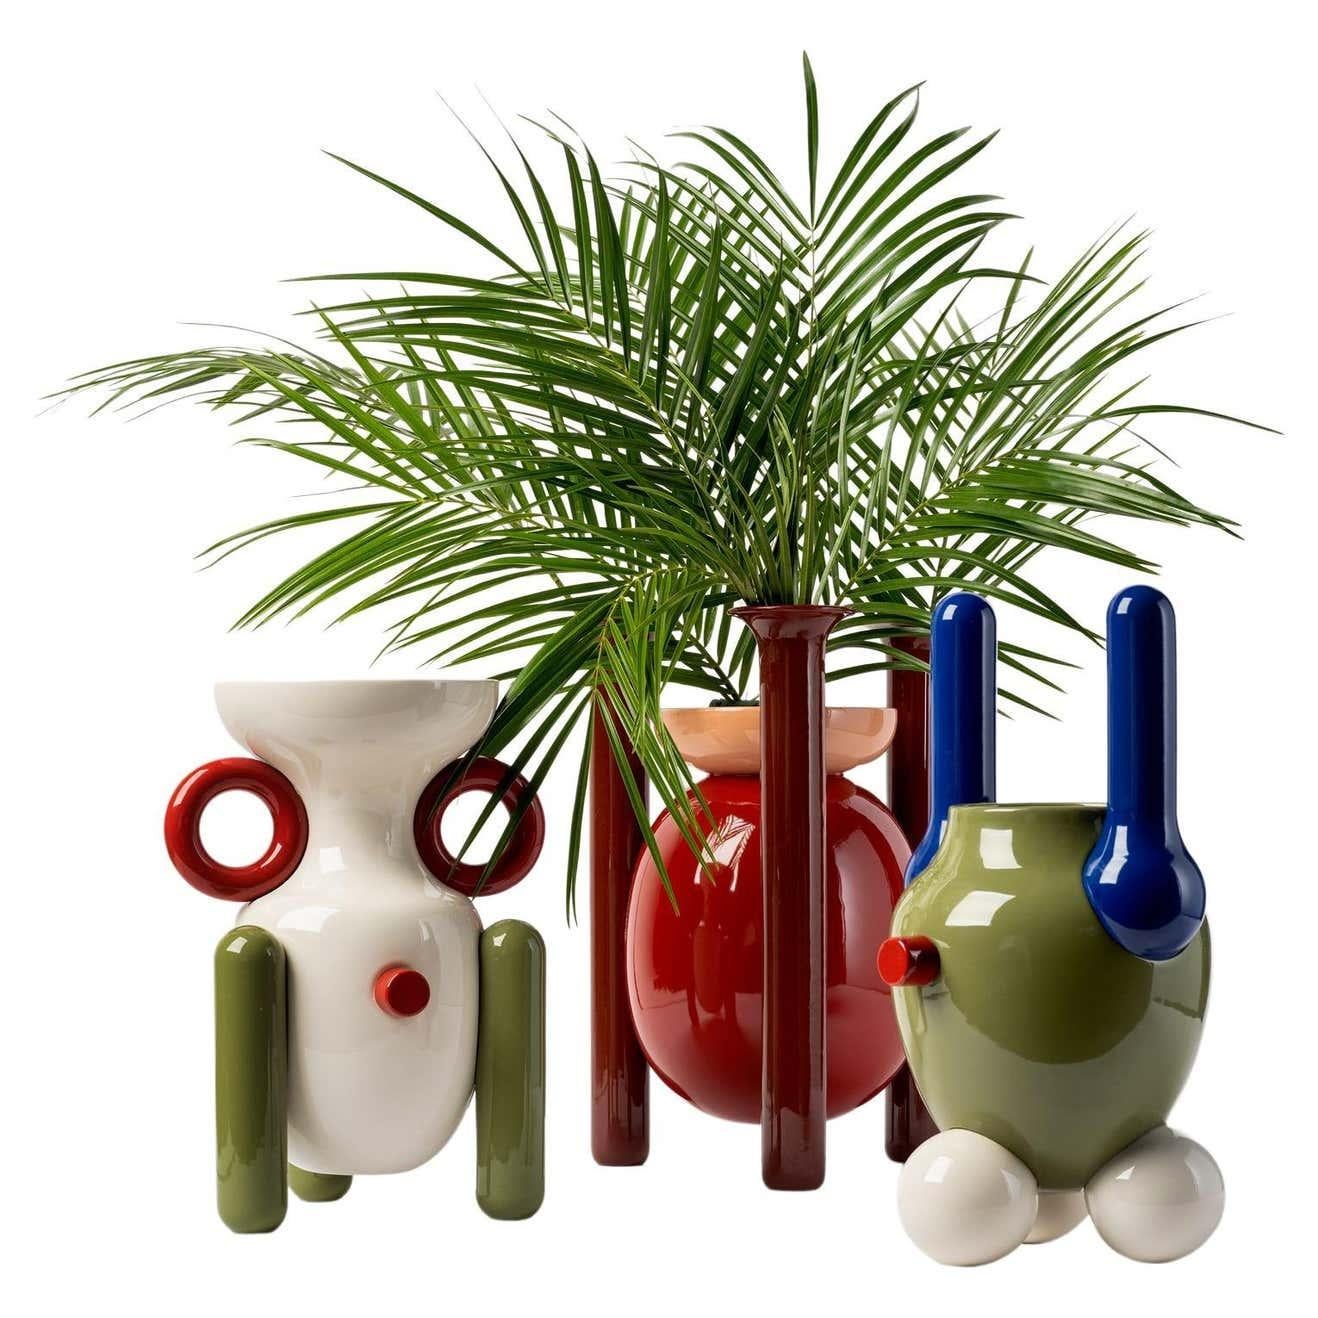 Contemporary Glazed ceramic explorer vase No.1

Materials: 
Ceramic

Dimensions: 
D 23 cm x W 23 cm x H 40 cm

The Showtime Vases are just as current as when we launched them over 10 years ago. They are little decorative sculptures that